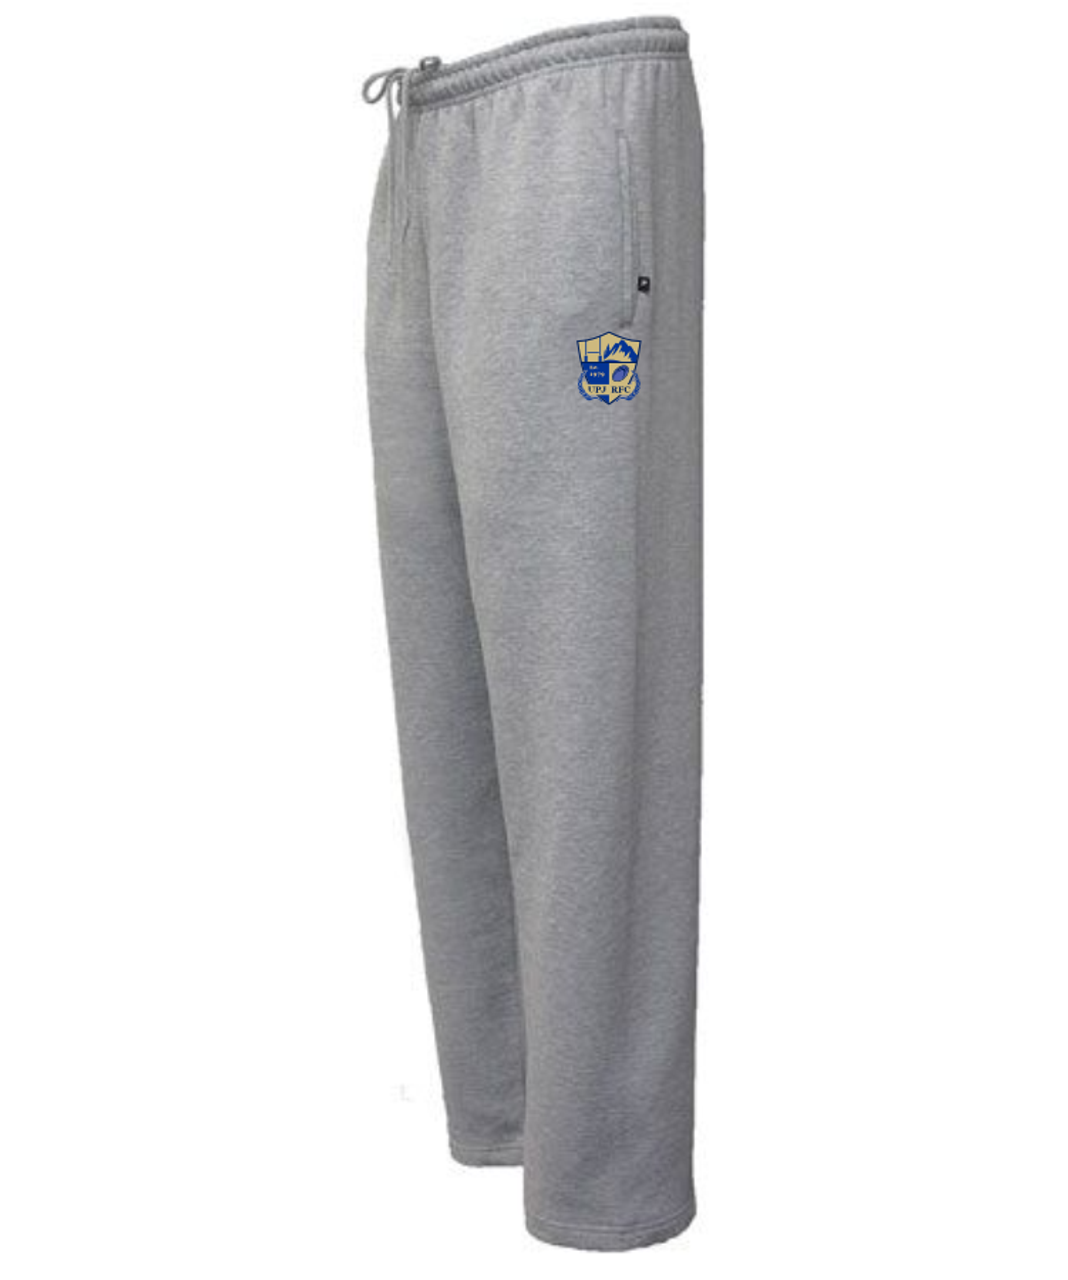 UPJ Rugby Sweatpant